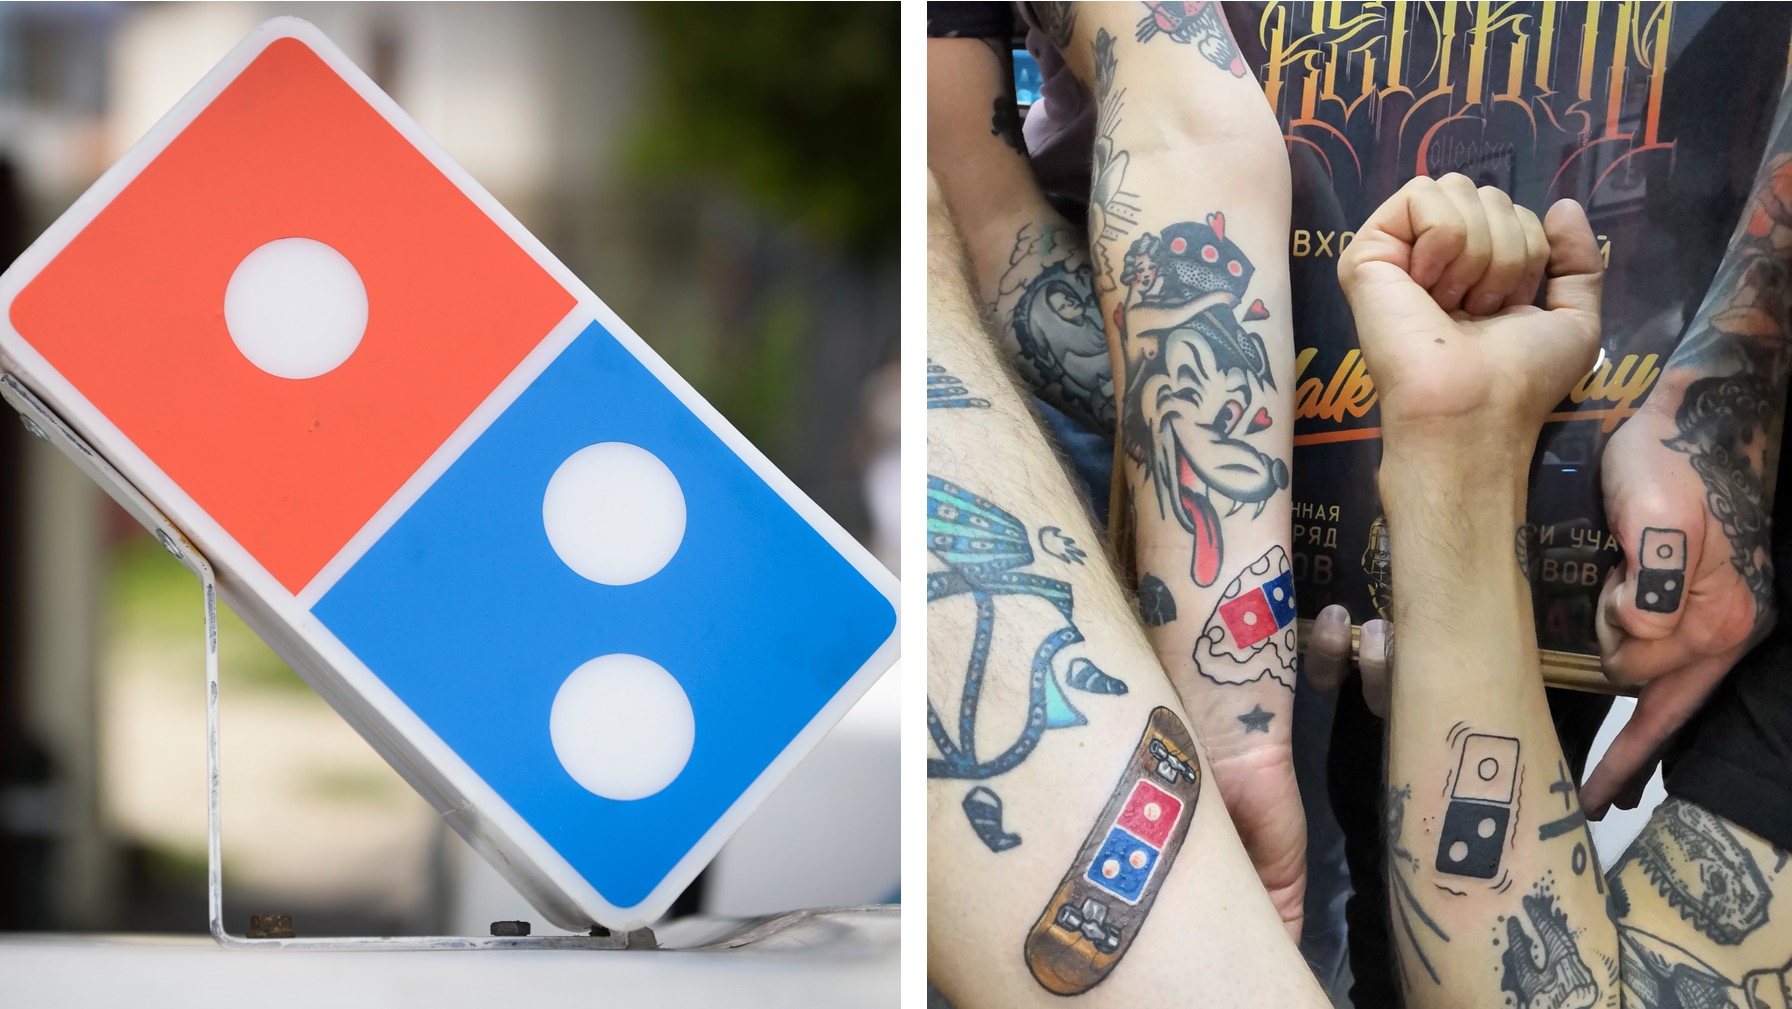 Russian Domino's Offers Free Pizza for Life for Domino's Tattoo